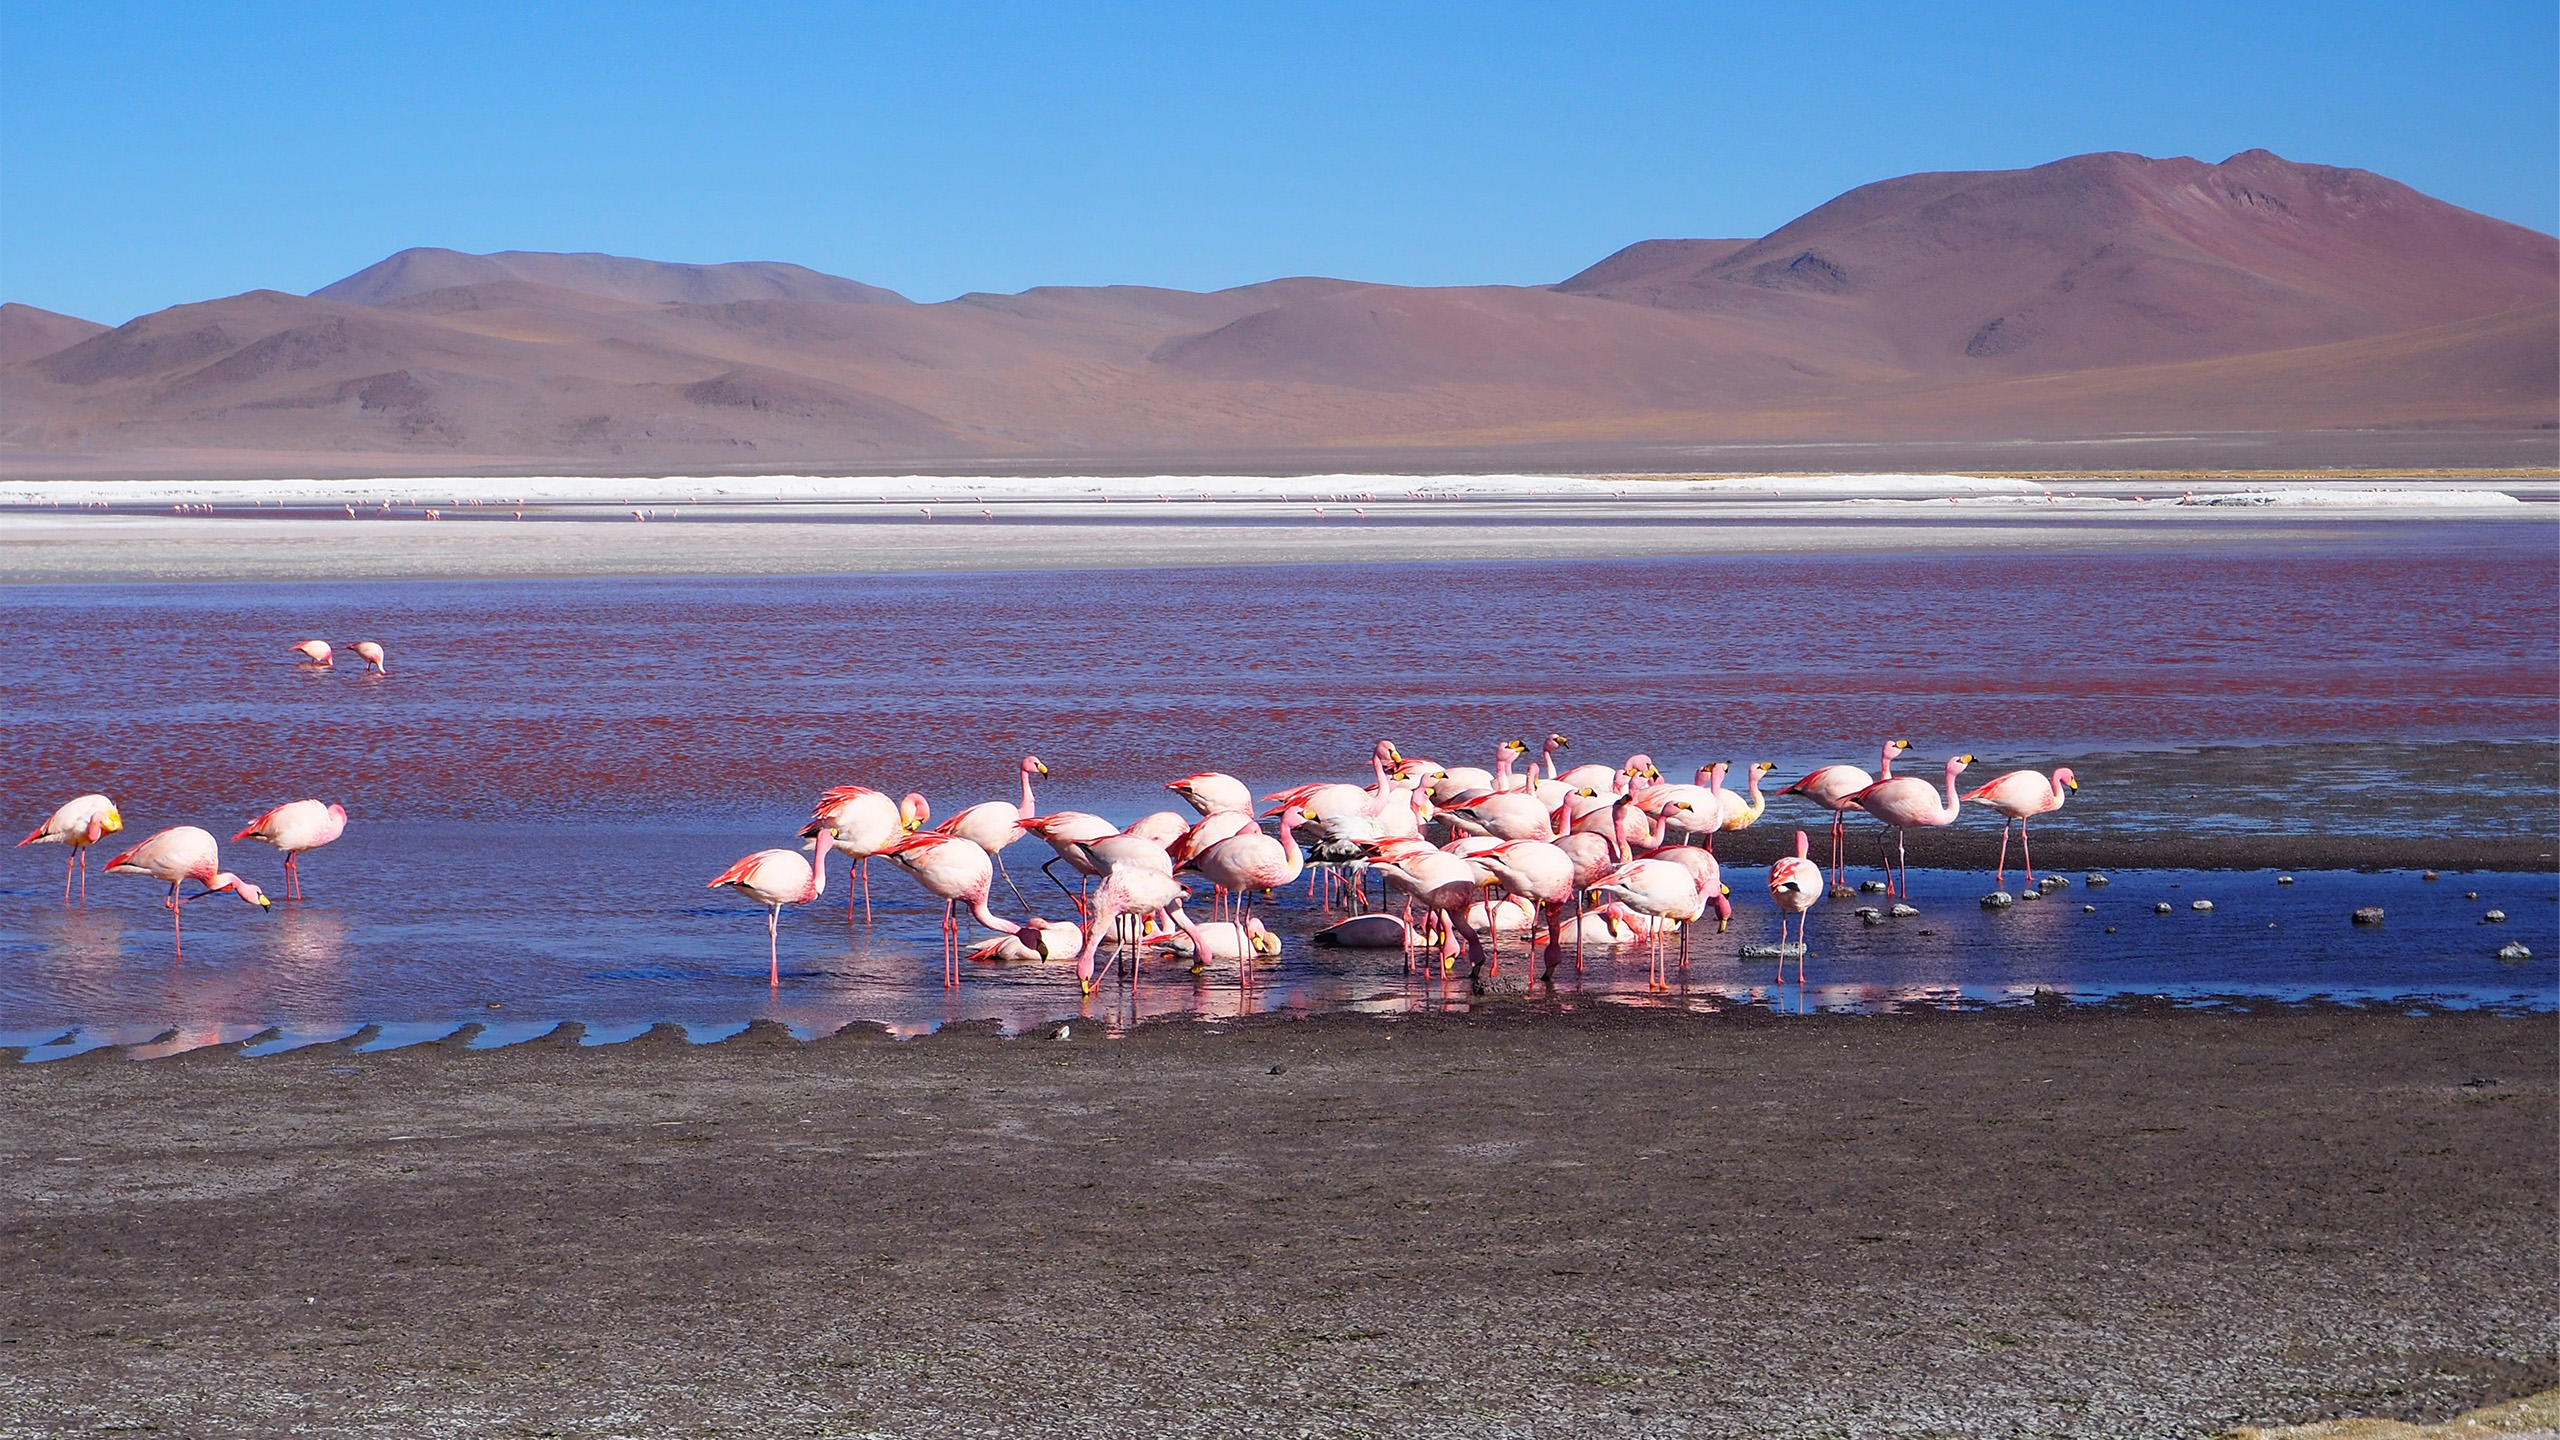 Lake Titicaca is of central importance as a habitat for numerous plants and animals; no less than three South American flamingo species are found here. | Helveola, Shutterstock